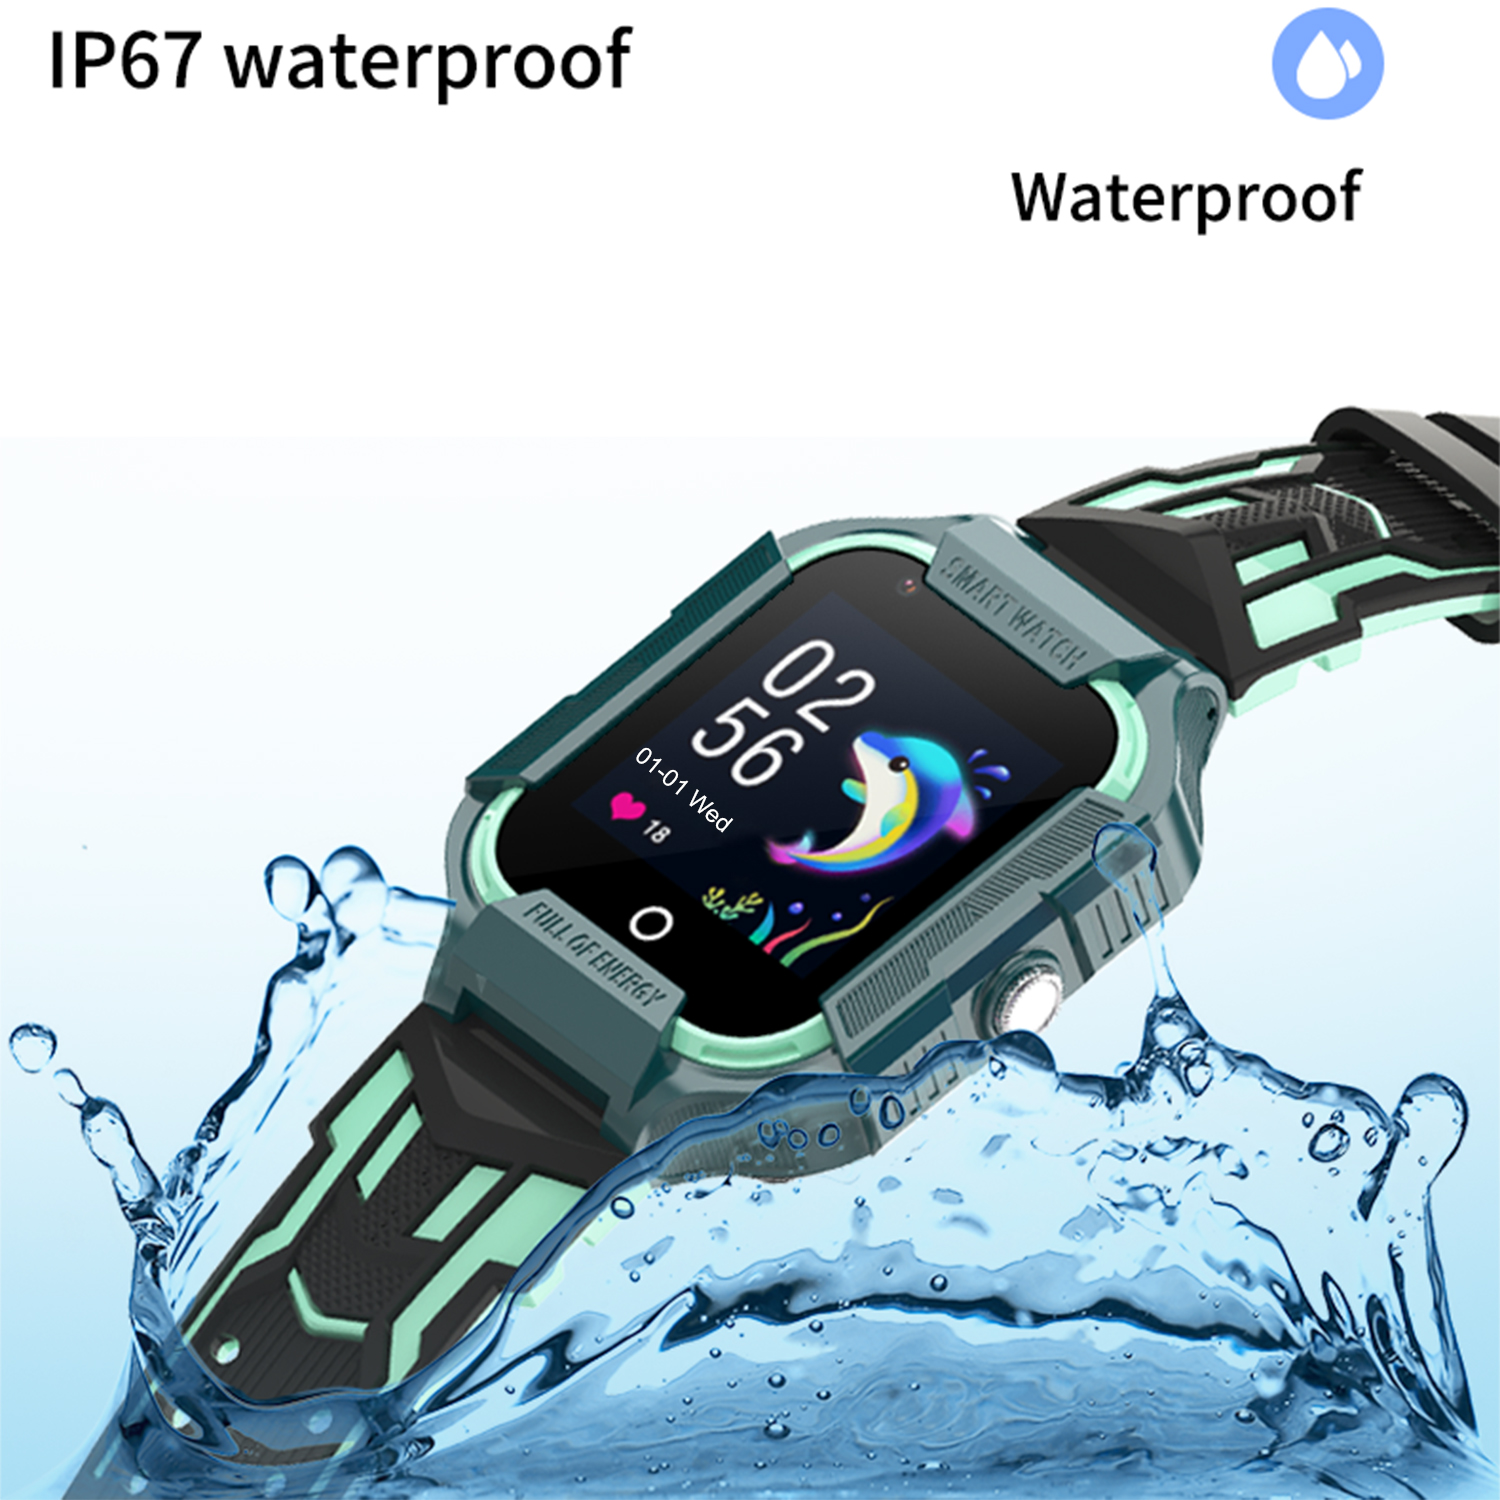 Quality China Factory LTE IP67 waterproof Students Watch Tracker GPS with 2 way Video Call for kids Emergency help P41